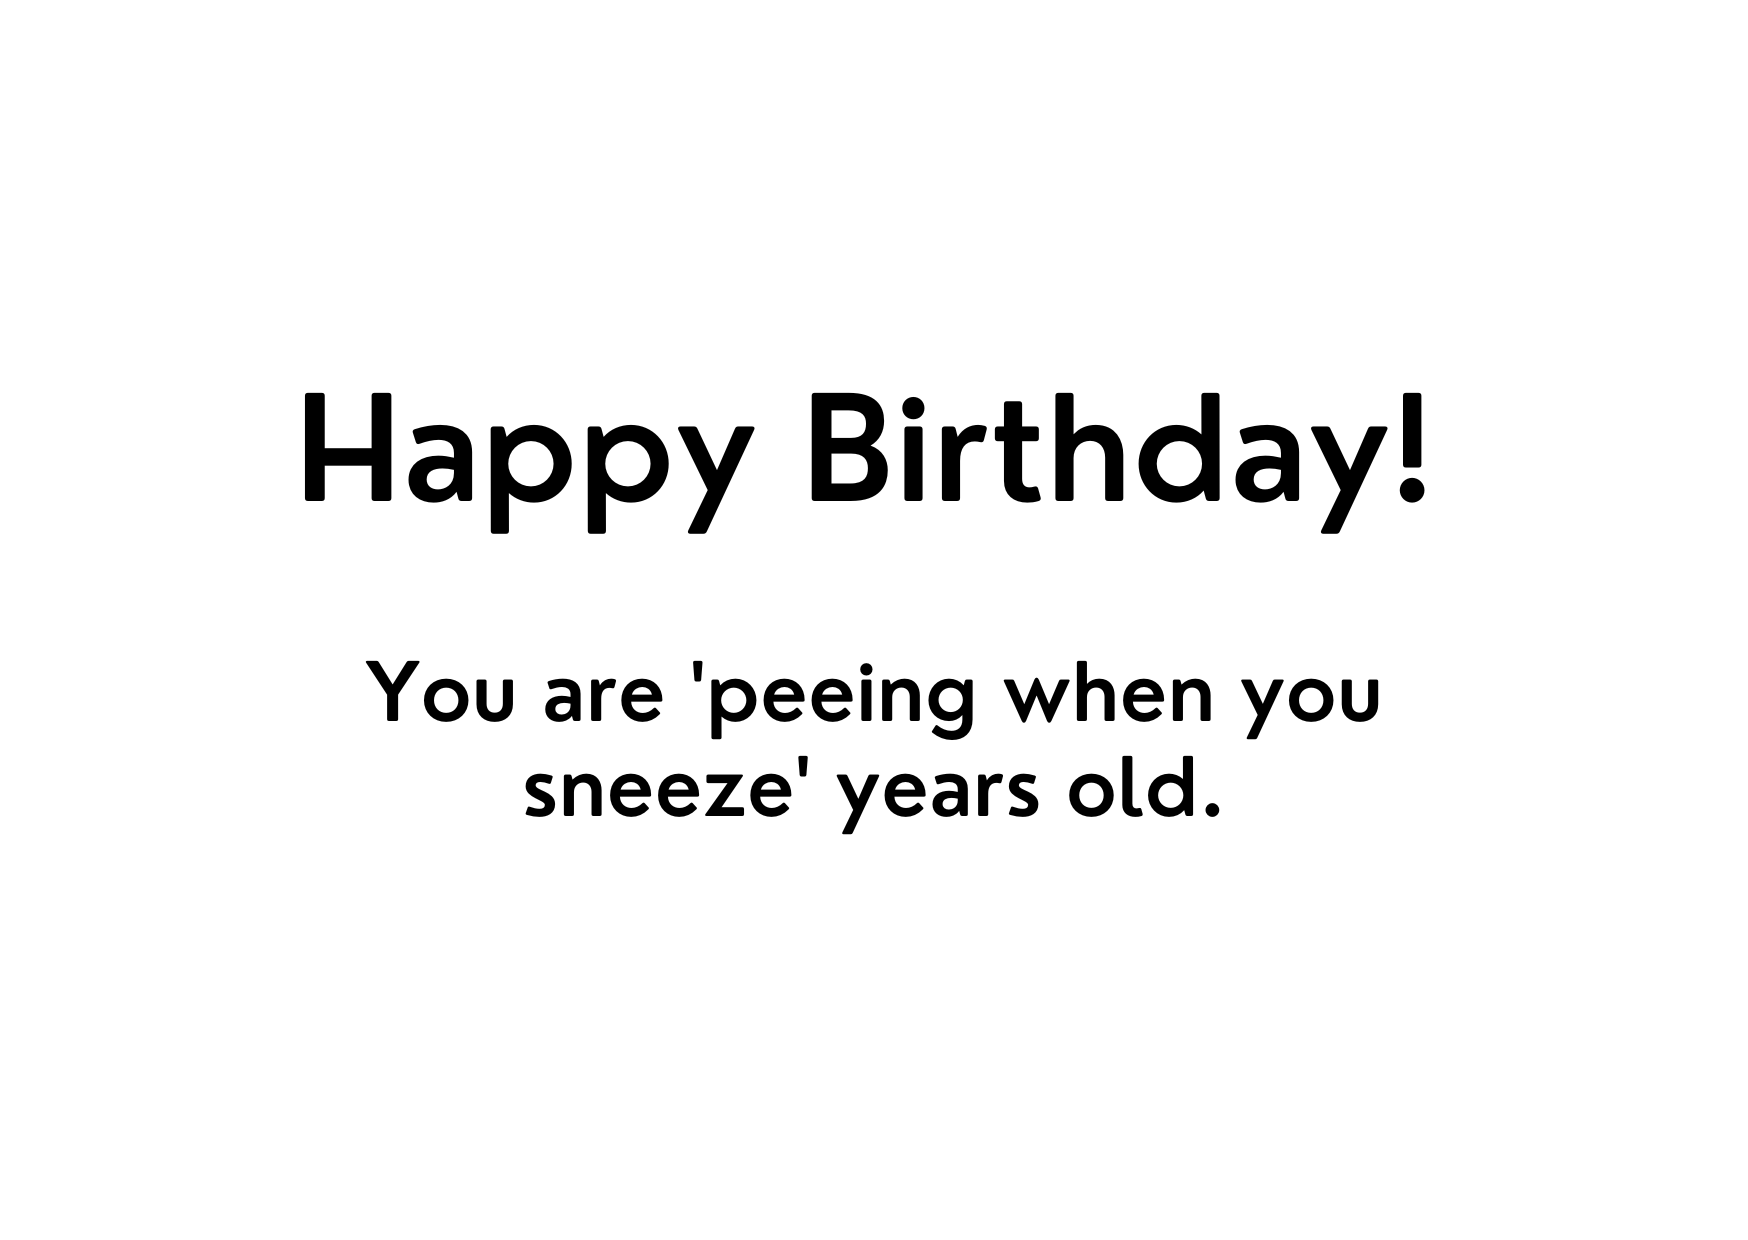 White seed paper greeting card saying "Happy Birthday! You are 'peeing when you sneeze' years old."